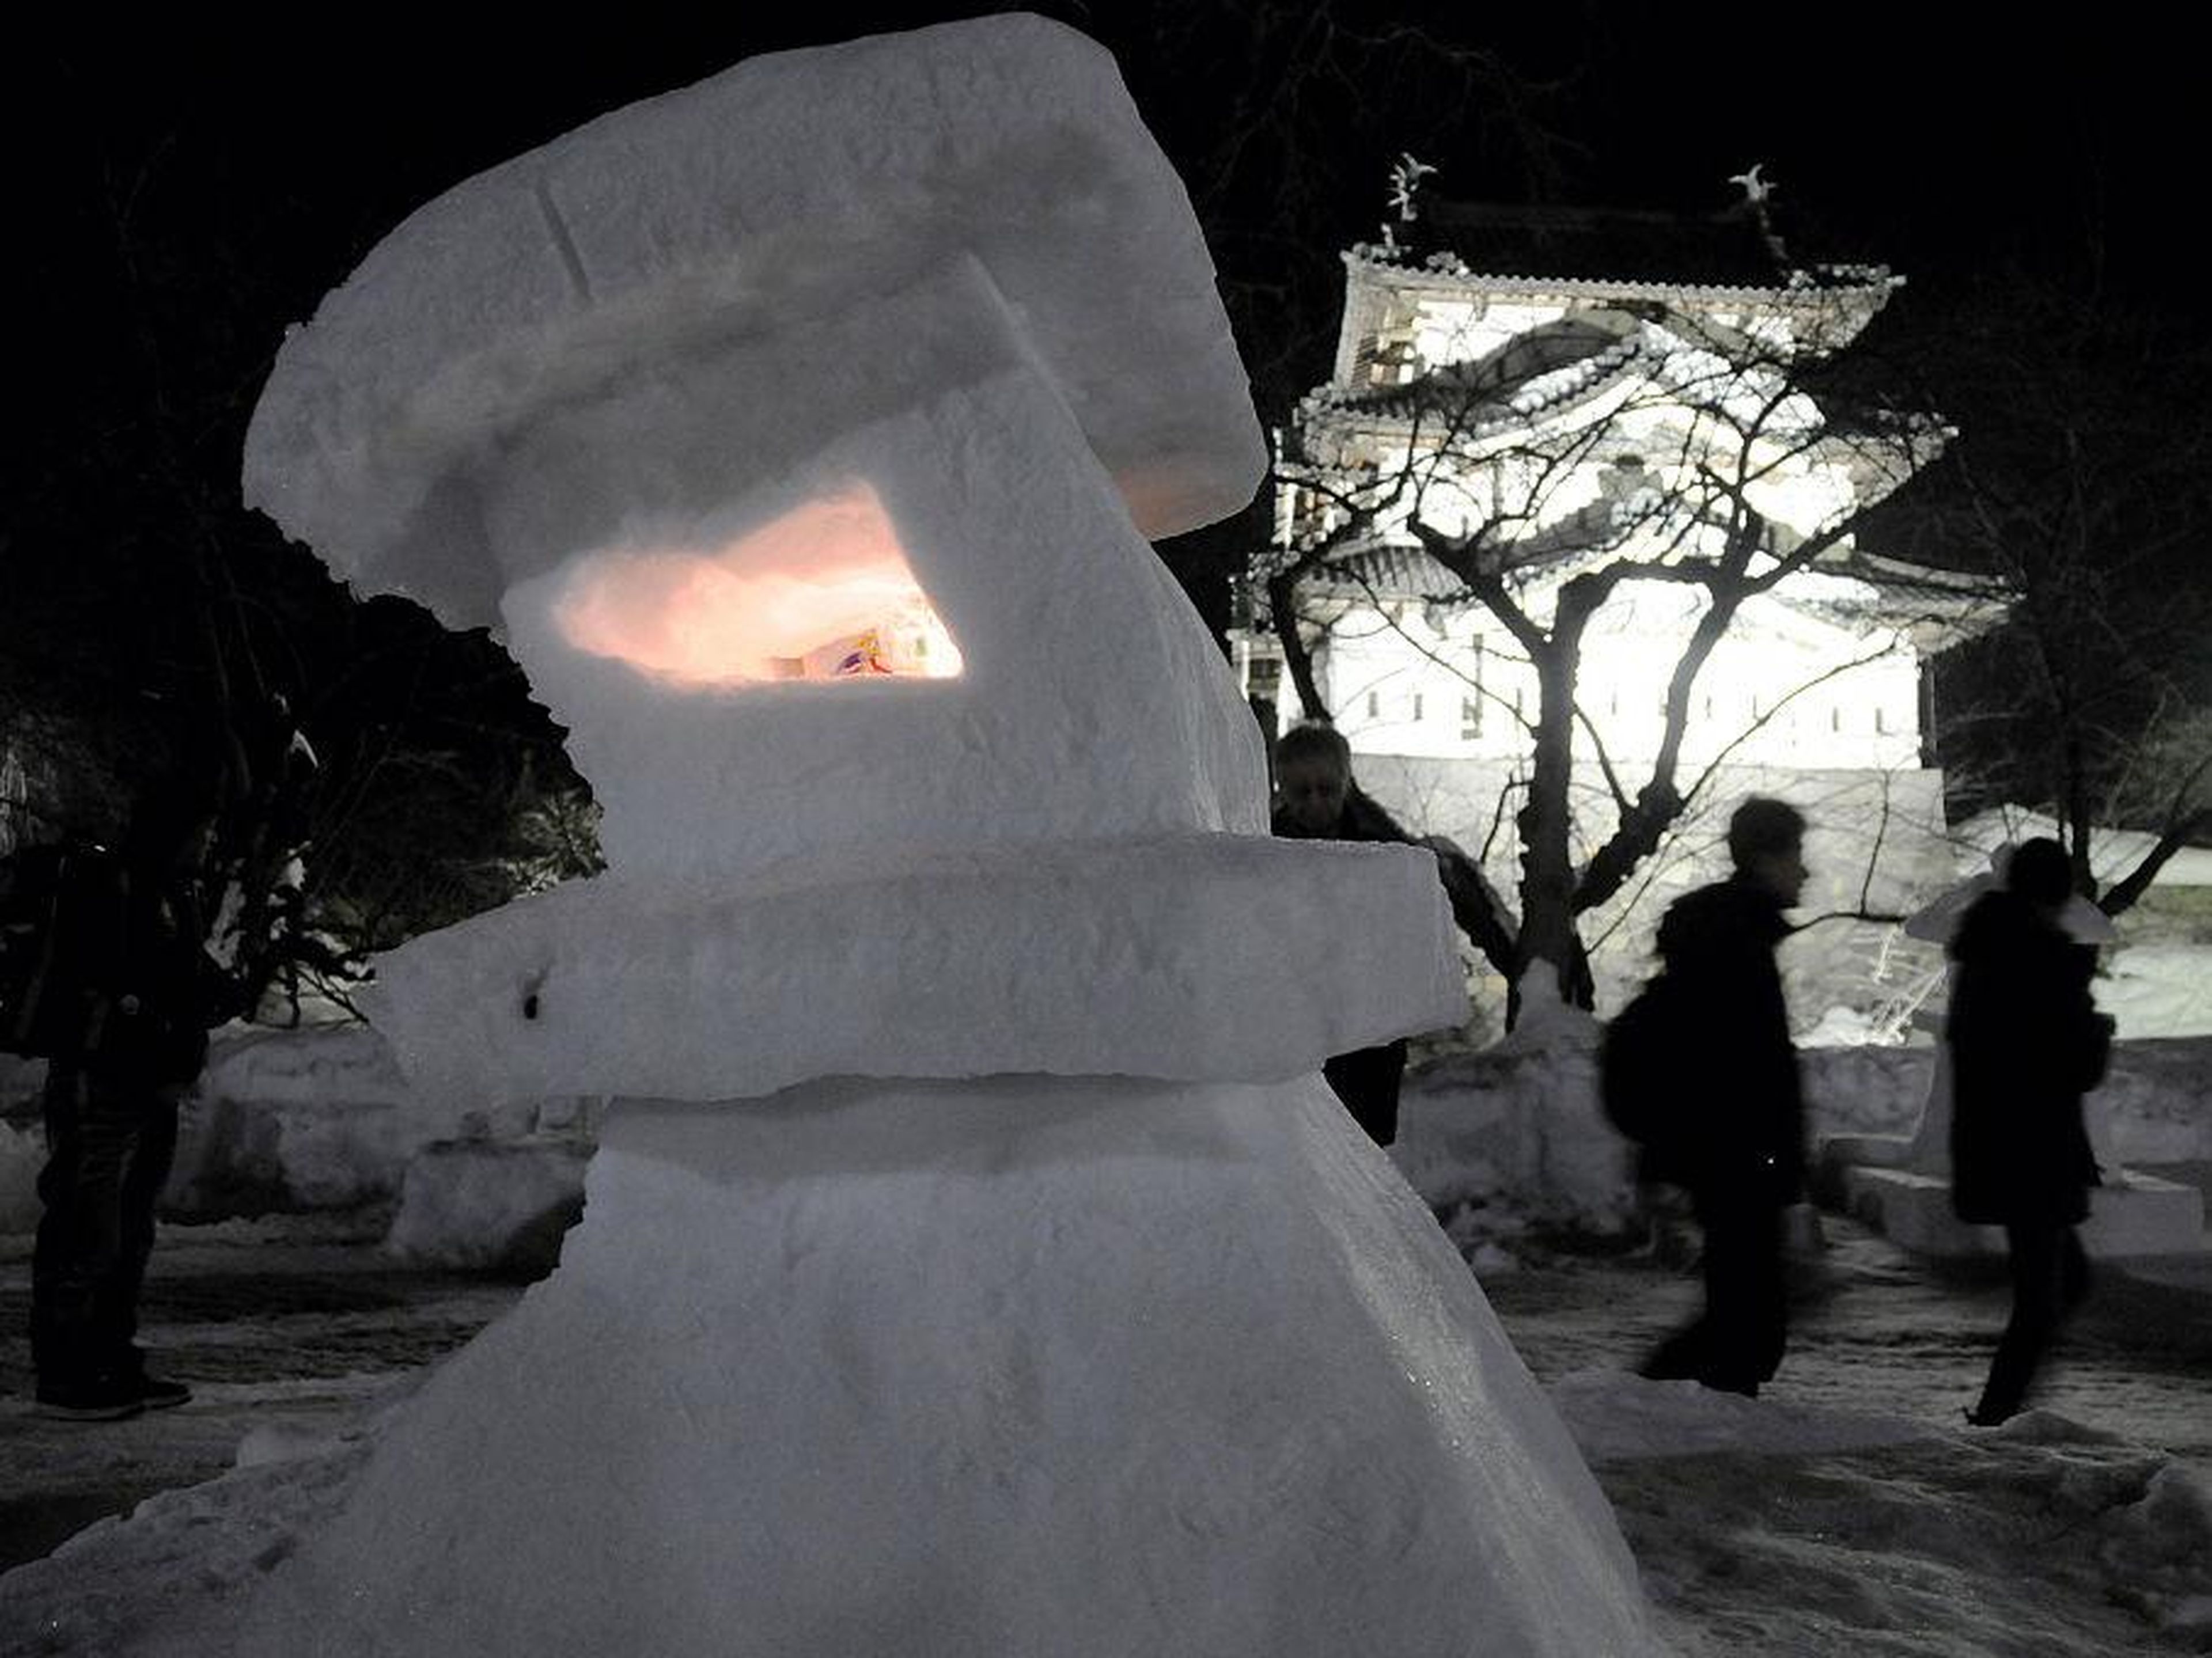 Different local artists build their own rendition of a snow lantern for the festival, which gives all the visitors many different pieces of art to look at.